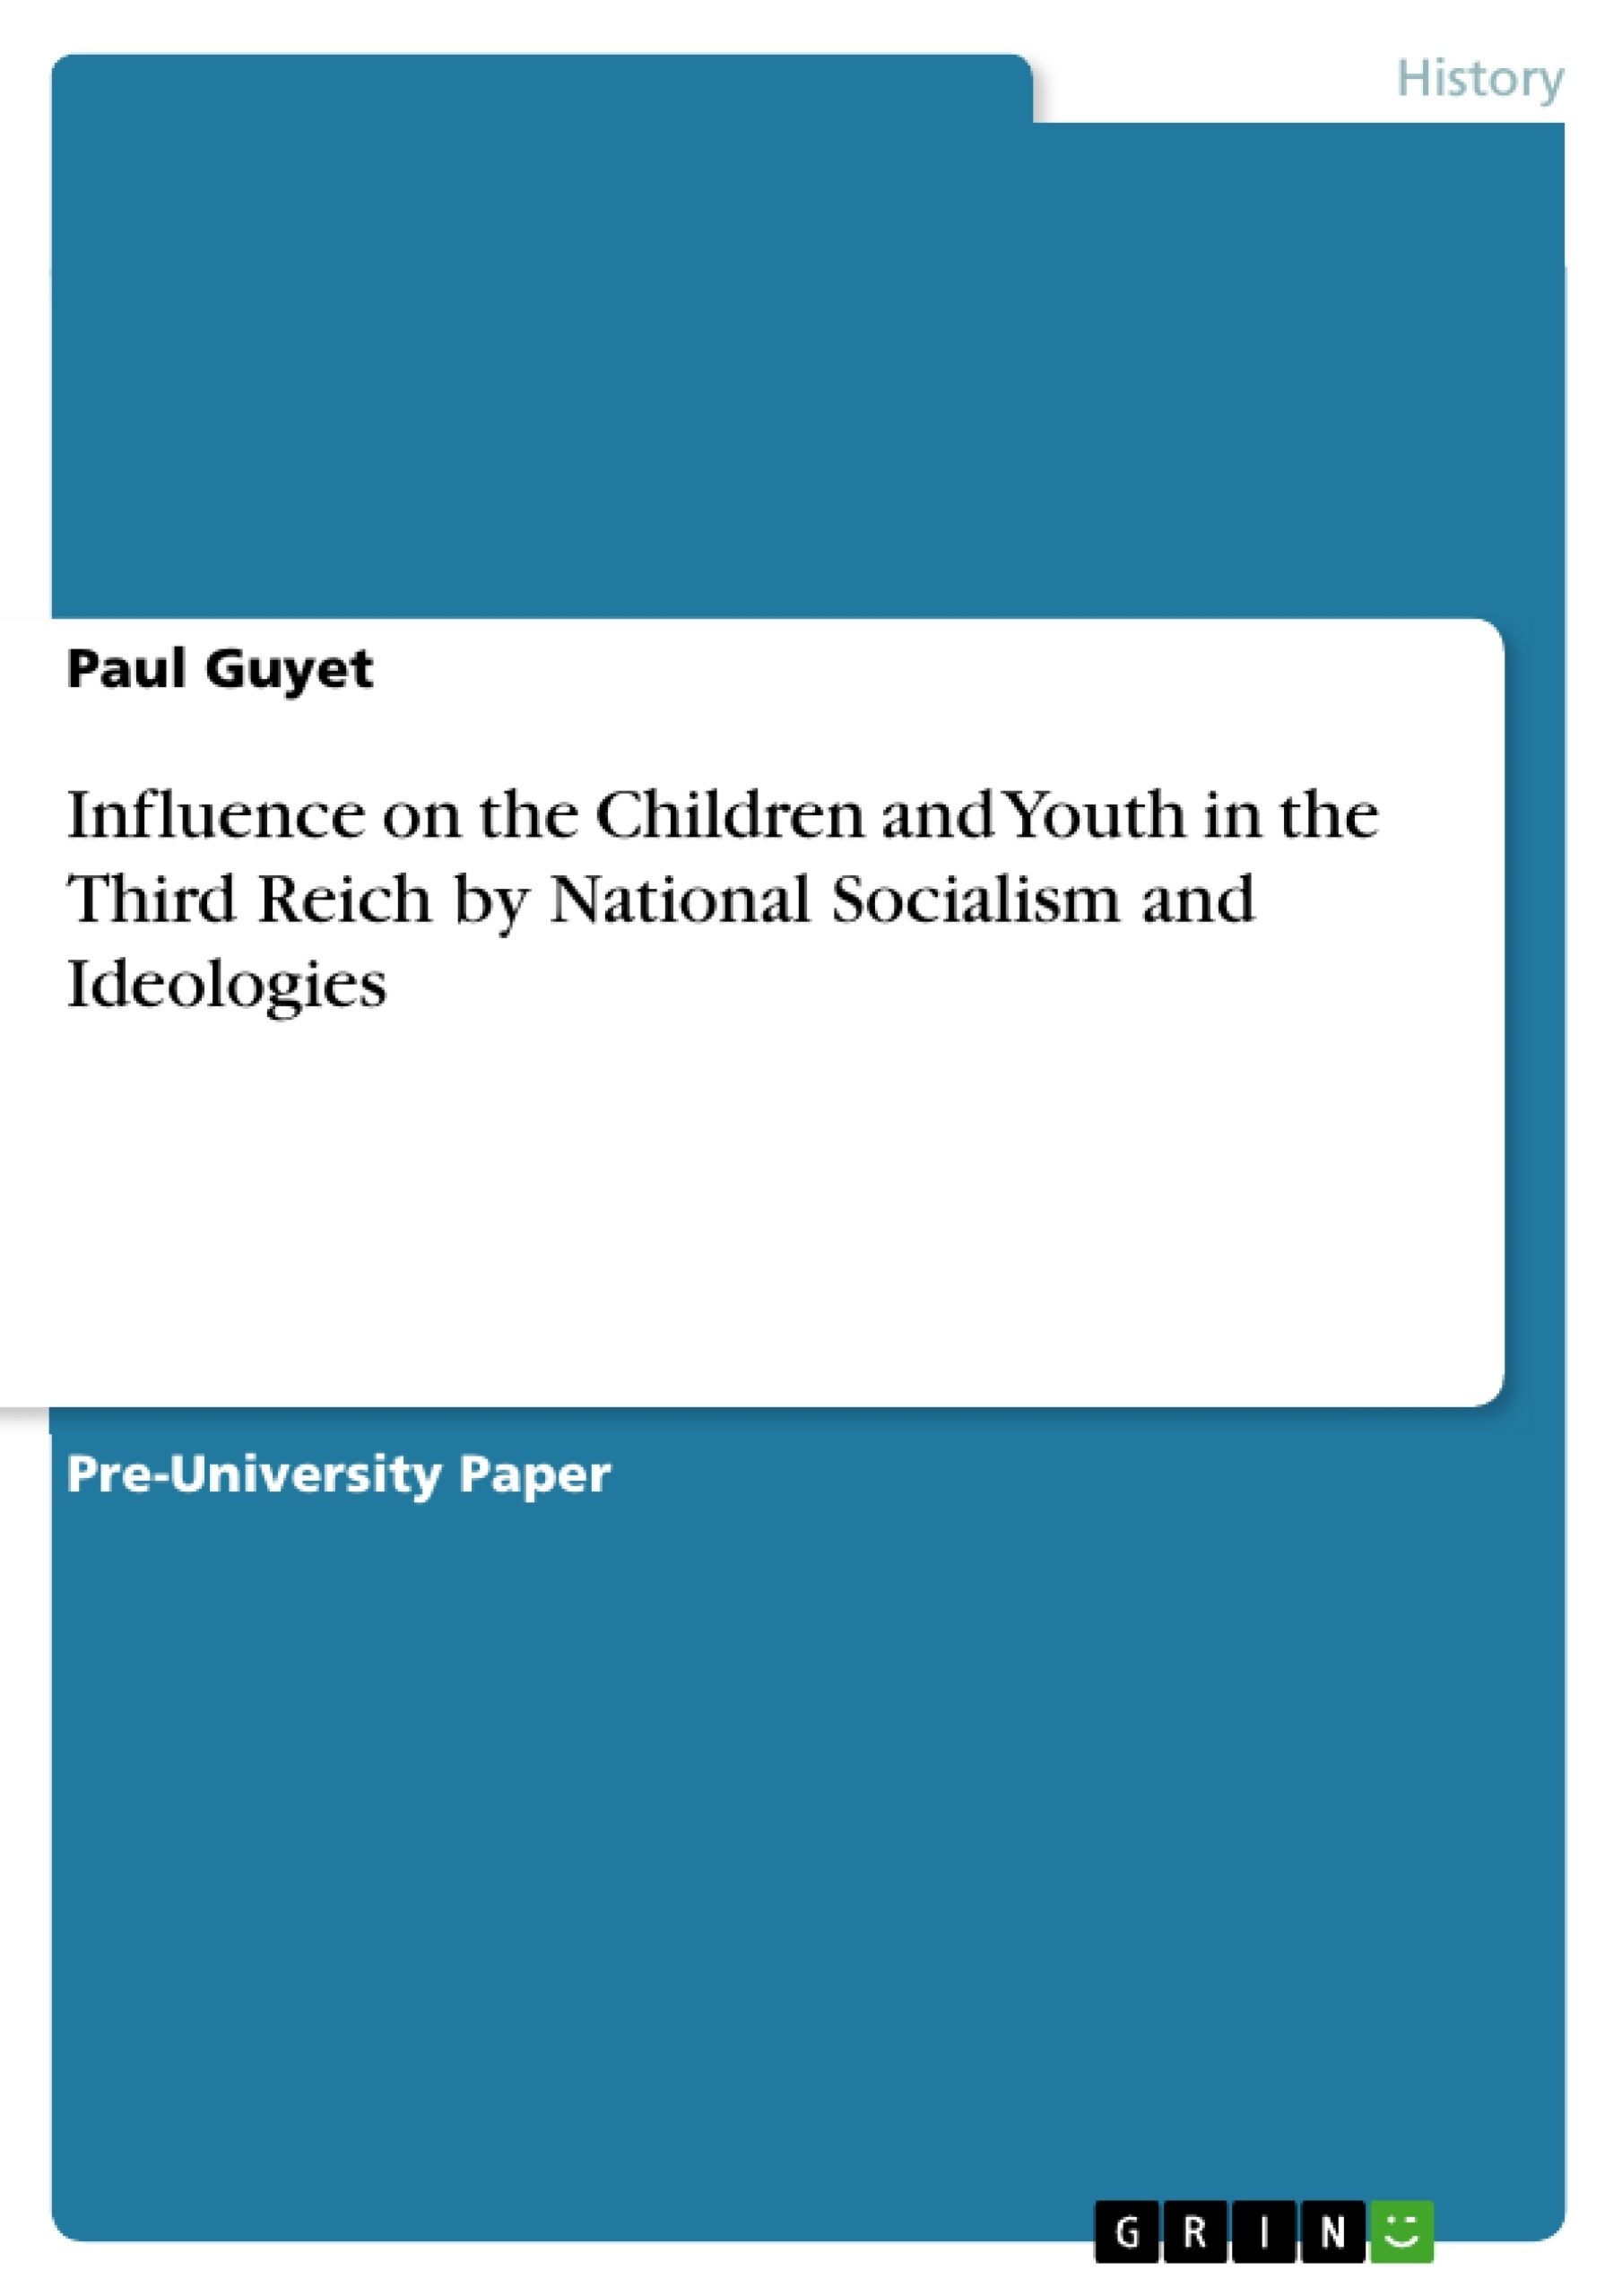 Title: Influence on the Children and Youth in the Third Reich by National Socialism and Ideologies